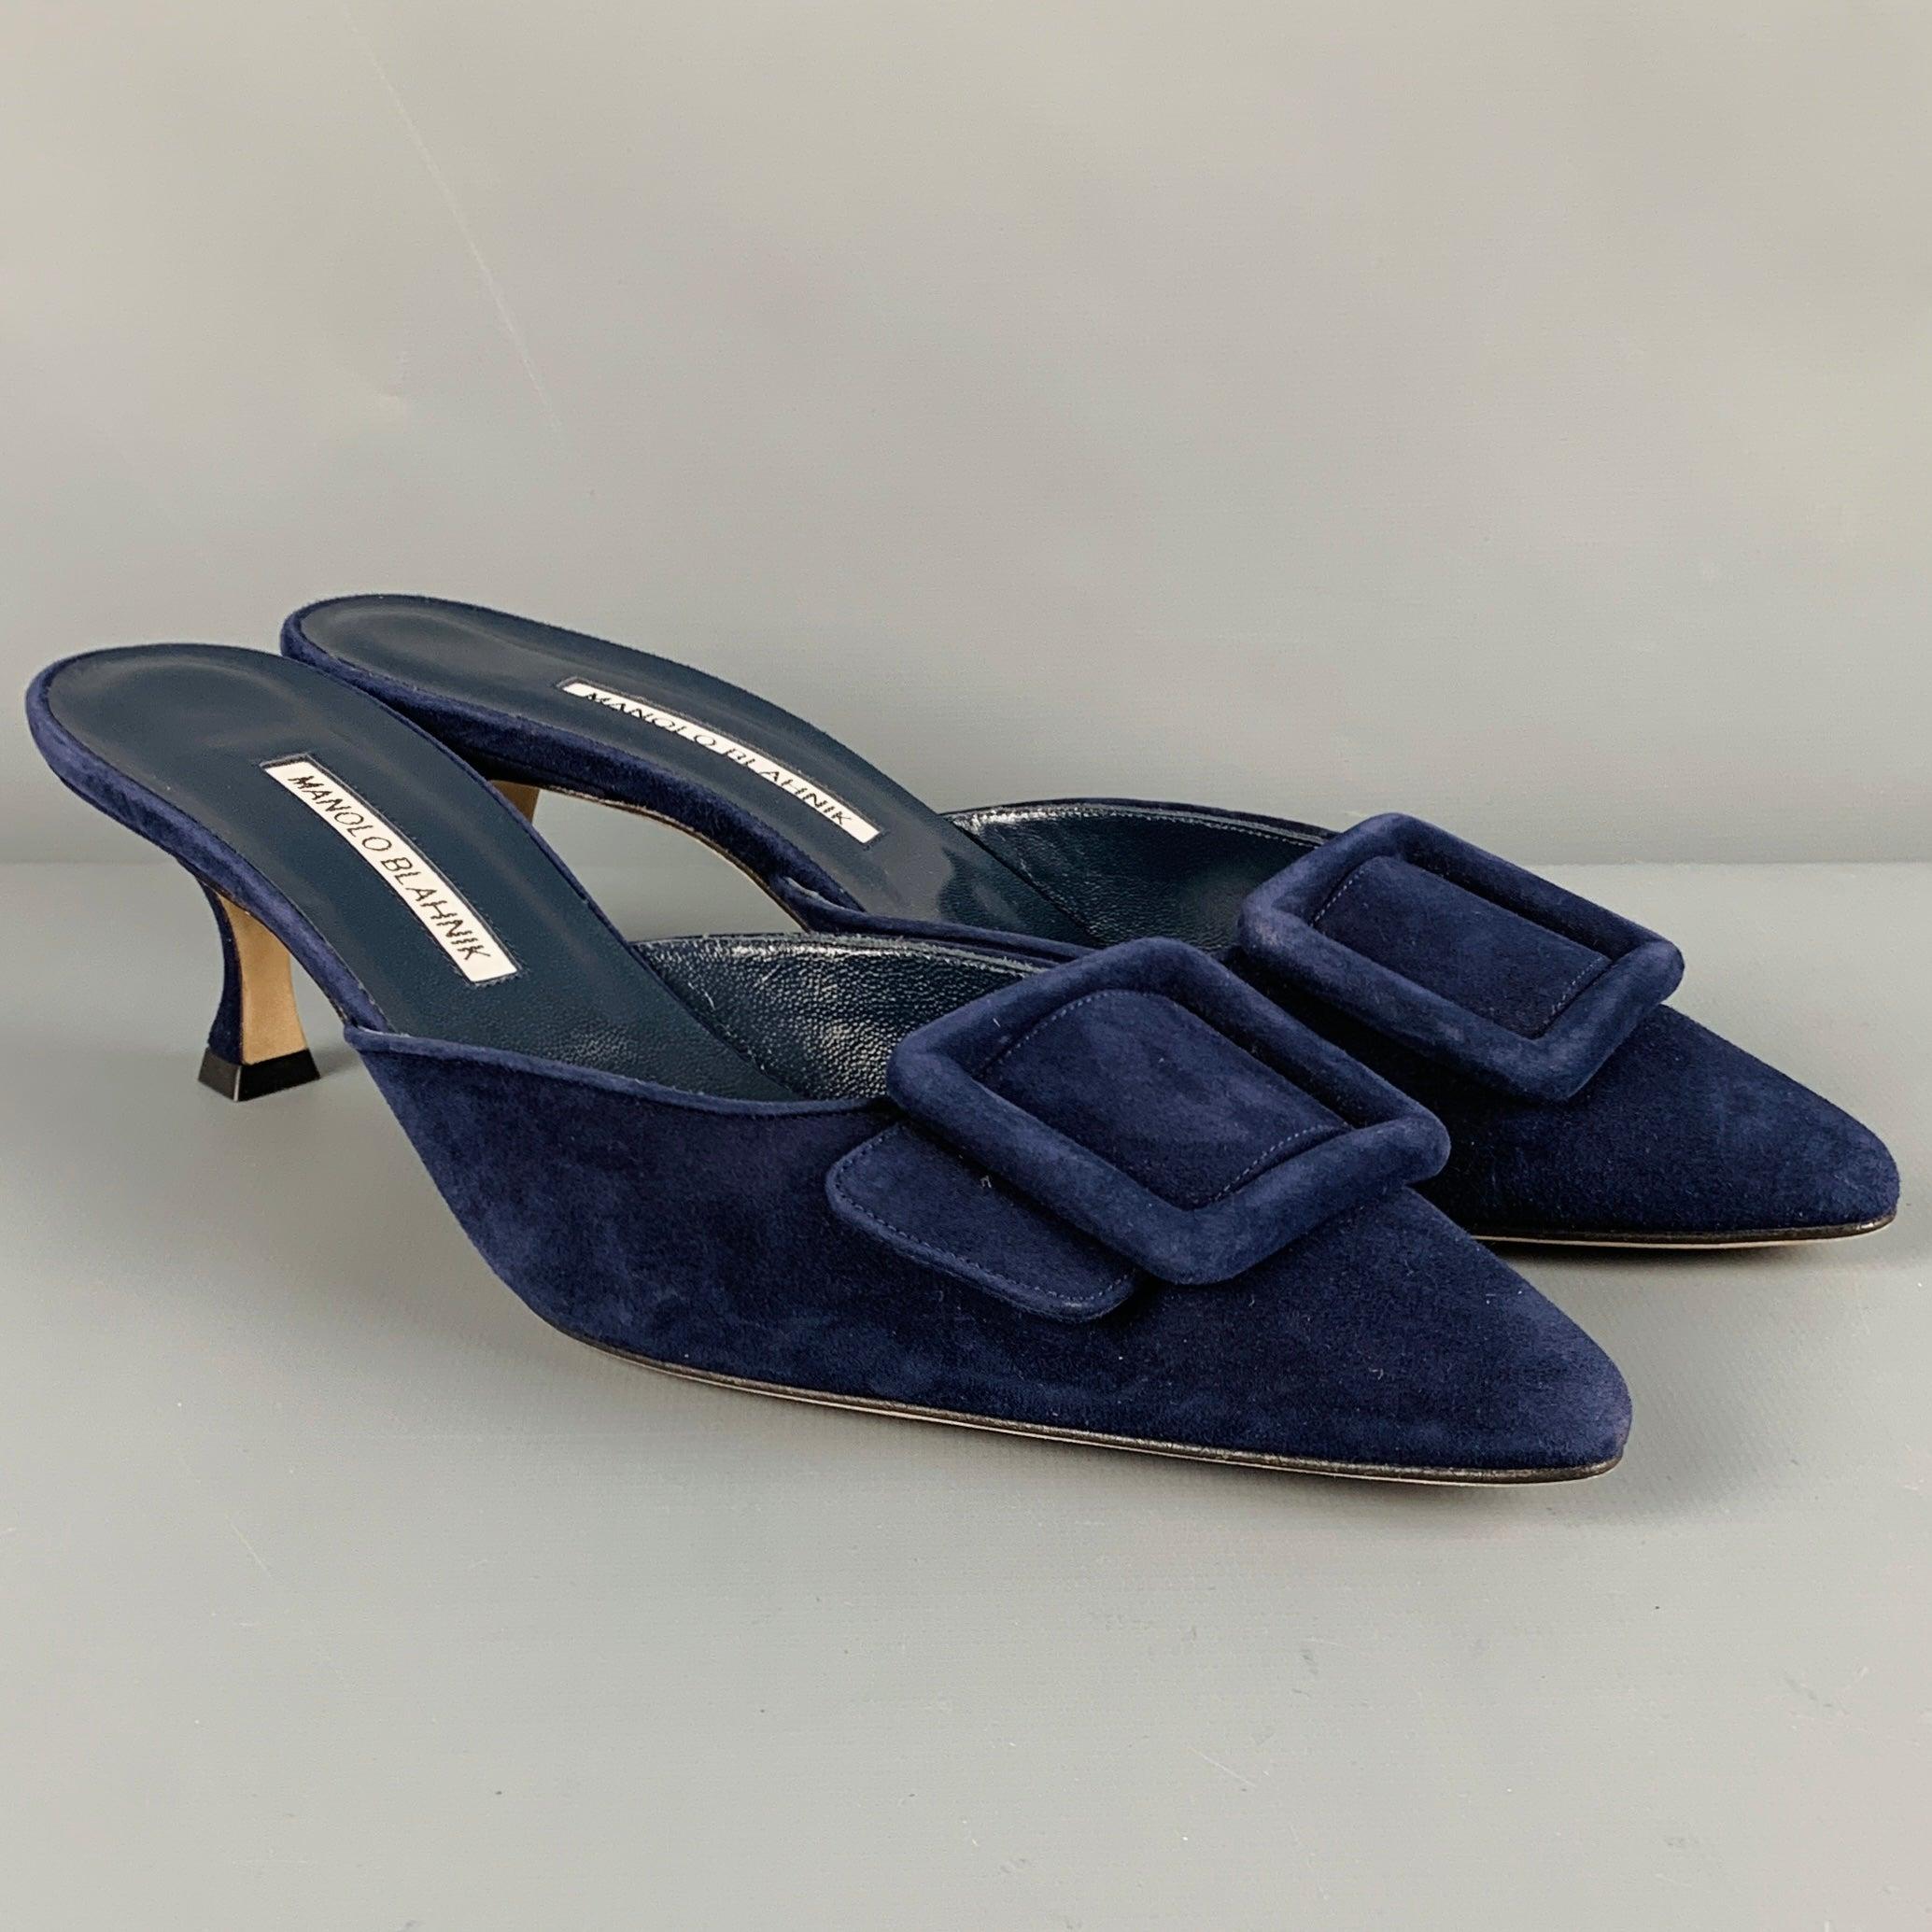 MANOLO BLAHNIK pumps
in a navy suede fabric featuring pointed toe, large buckle detail, and kitten heel. Handmade in Italy.Excellent Pre-Owned Condition. 

Marked:   40 

Measurements: 
  Heel: 2.5 inches 
  
  
 
Reference No.: 129131
Category: